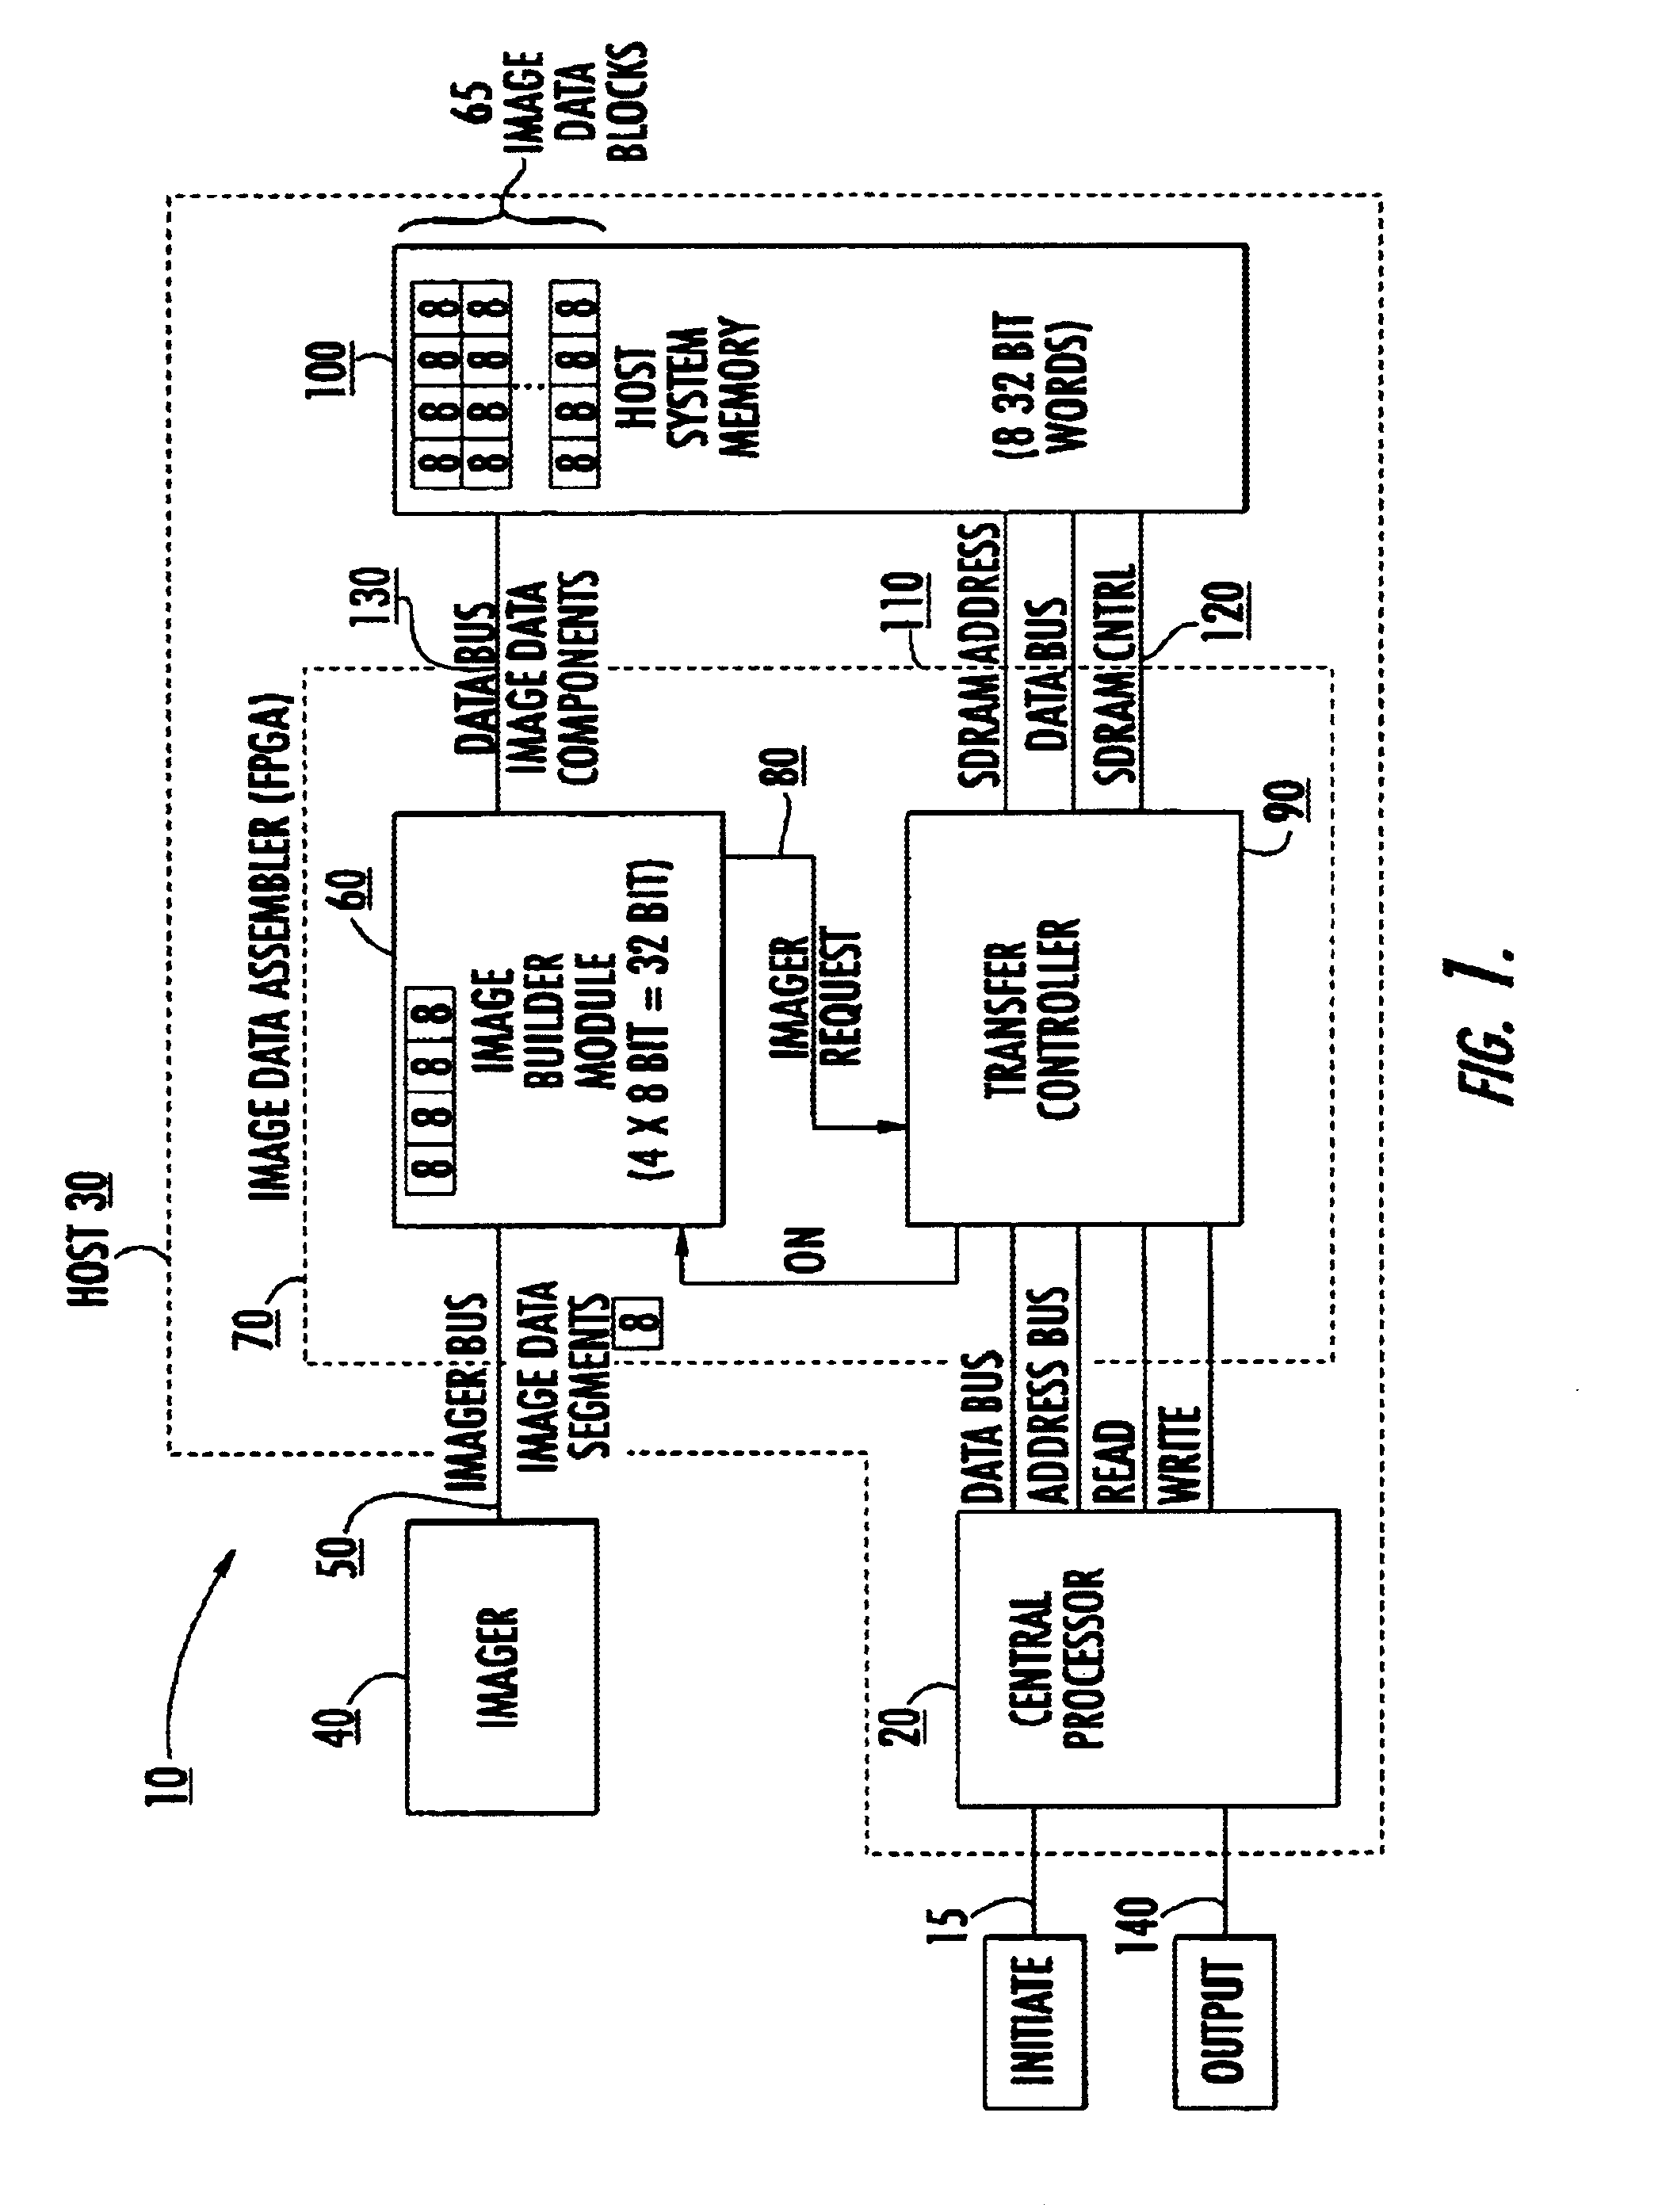 Methods and apparatus for image capture and decoding in a centralized processing unit